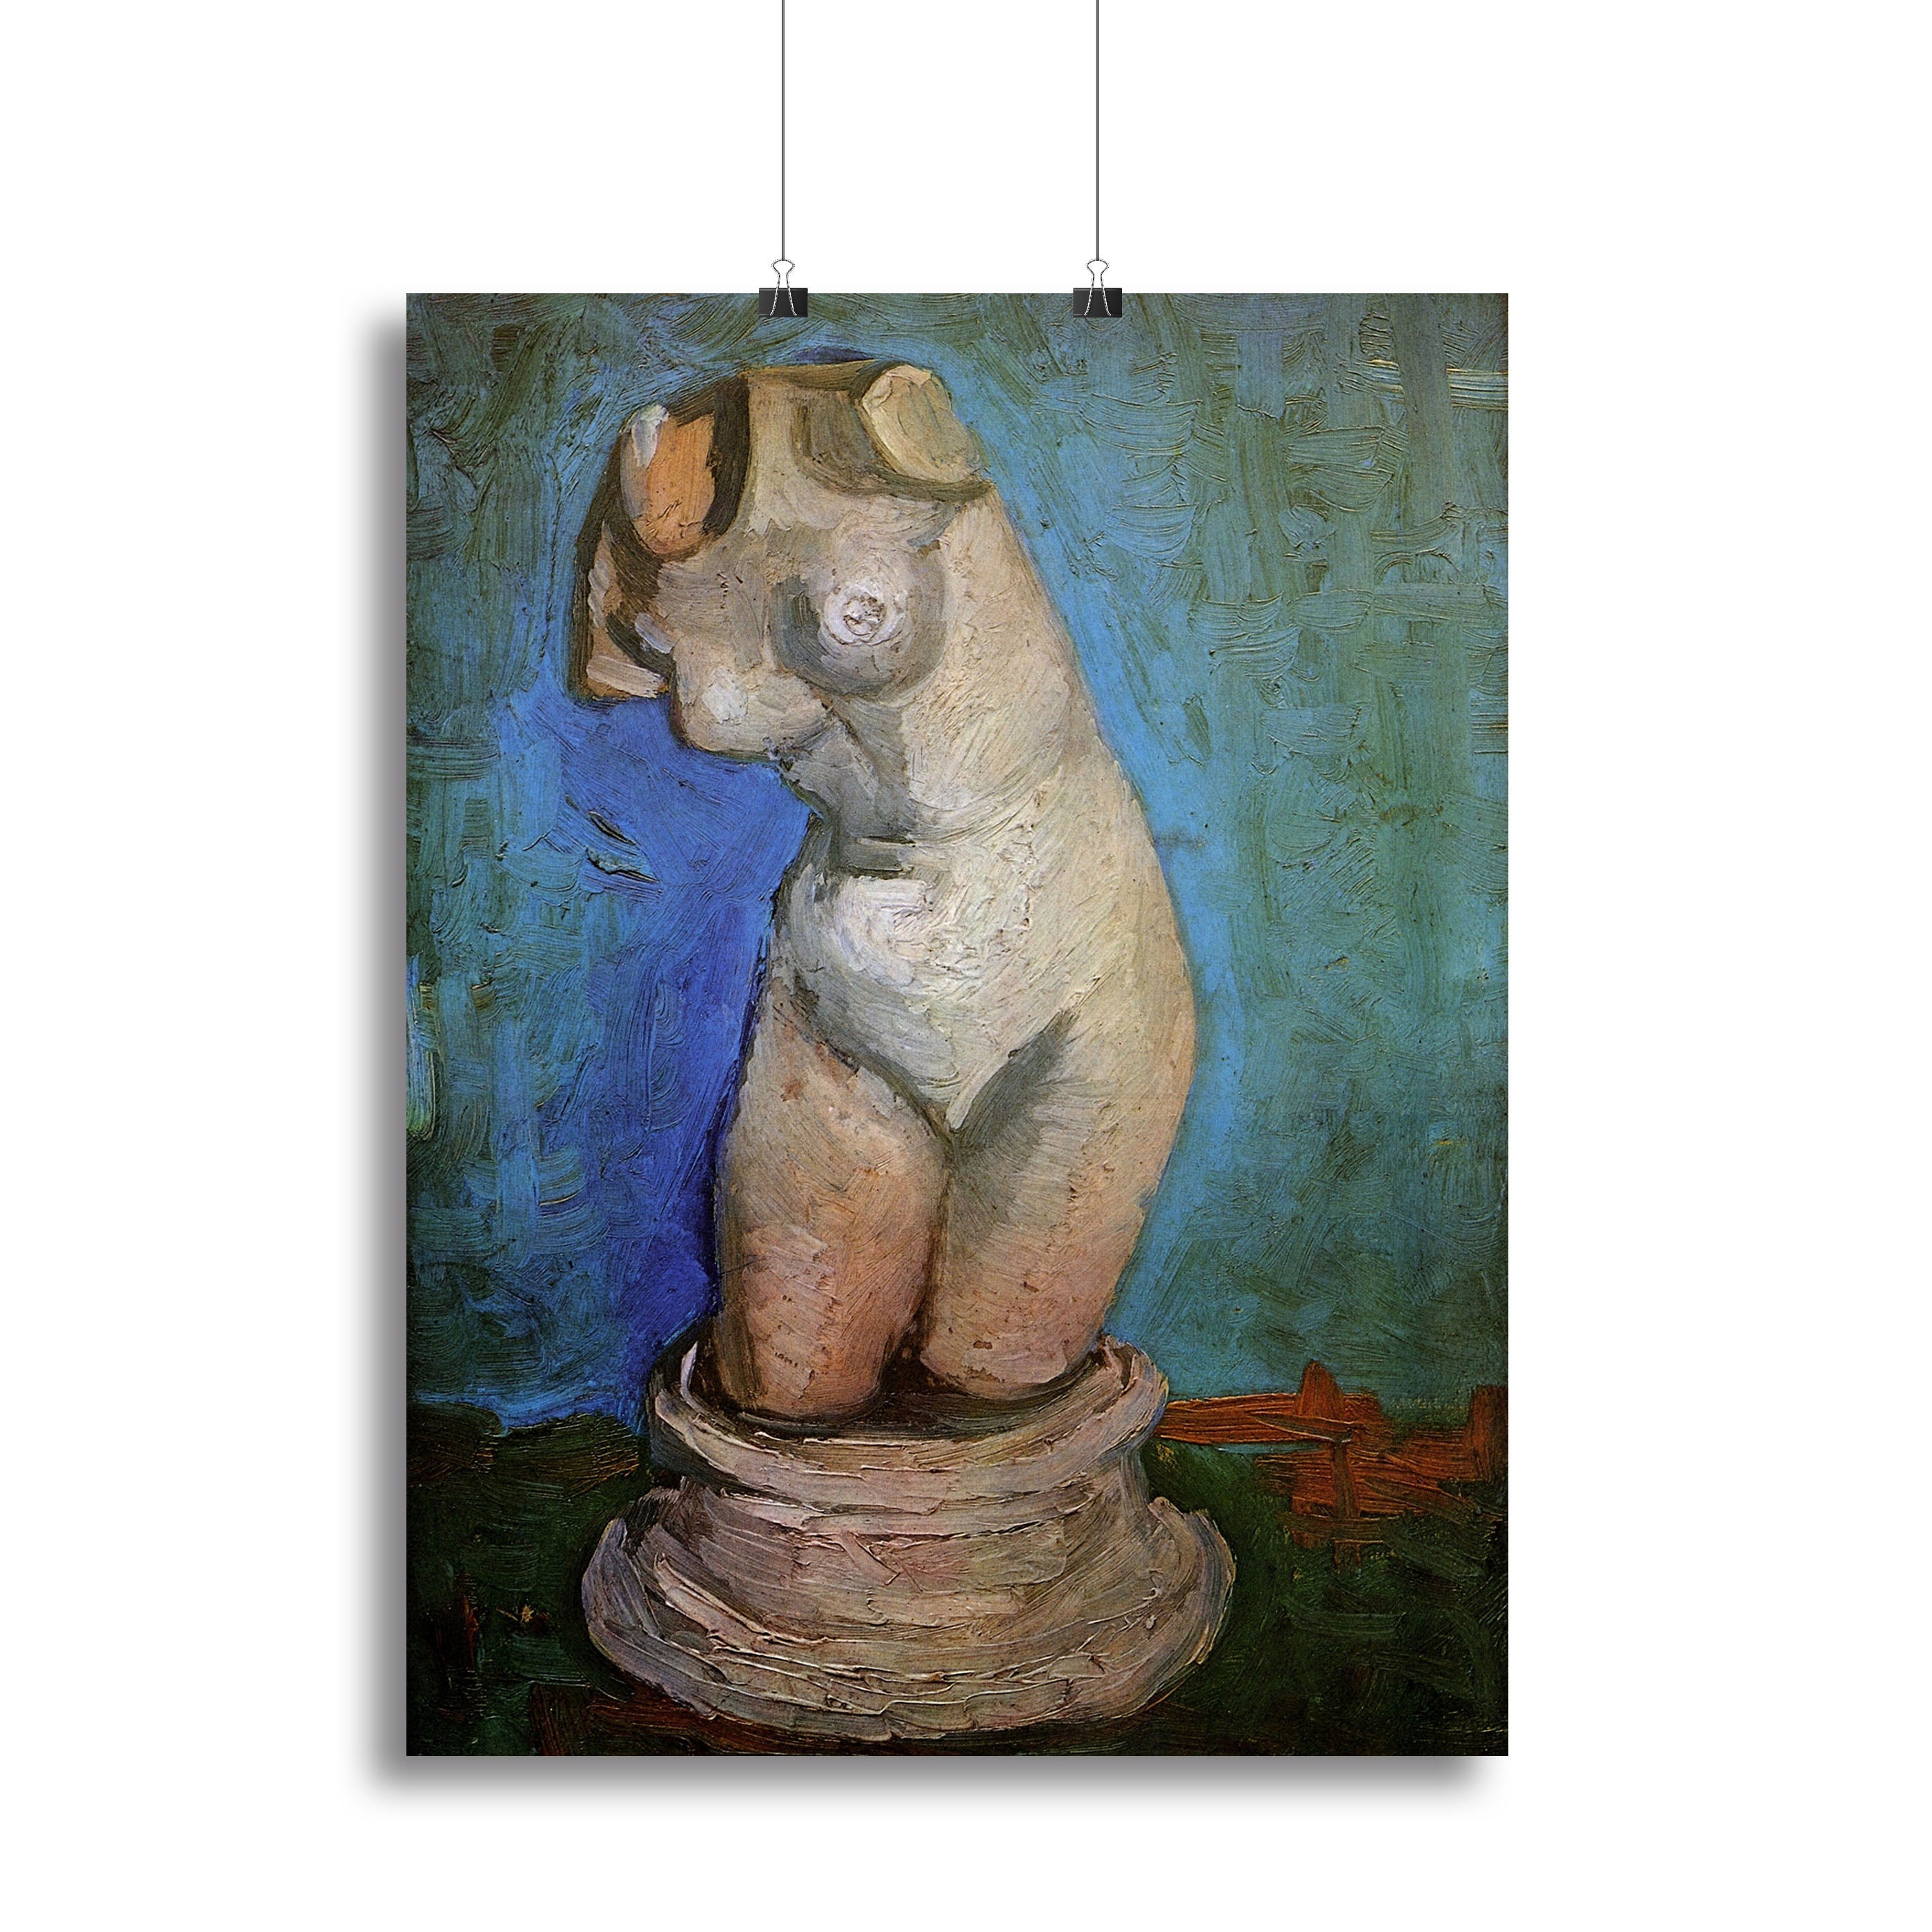 Plaster Statuette of a Female Torso 2 by Van Gogh Canvas Print or Poster - Canvas Art Rocks - 2